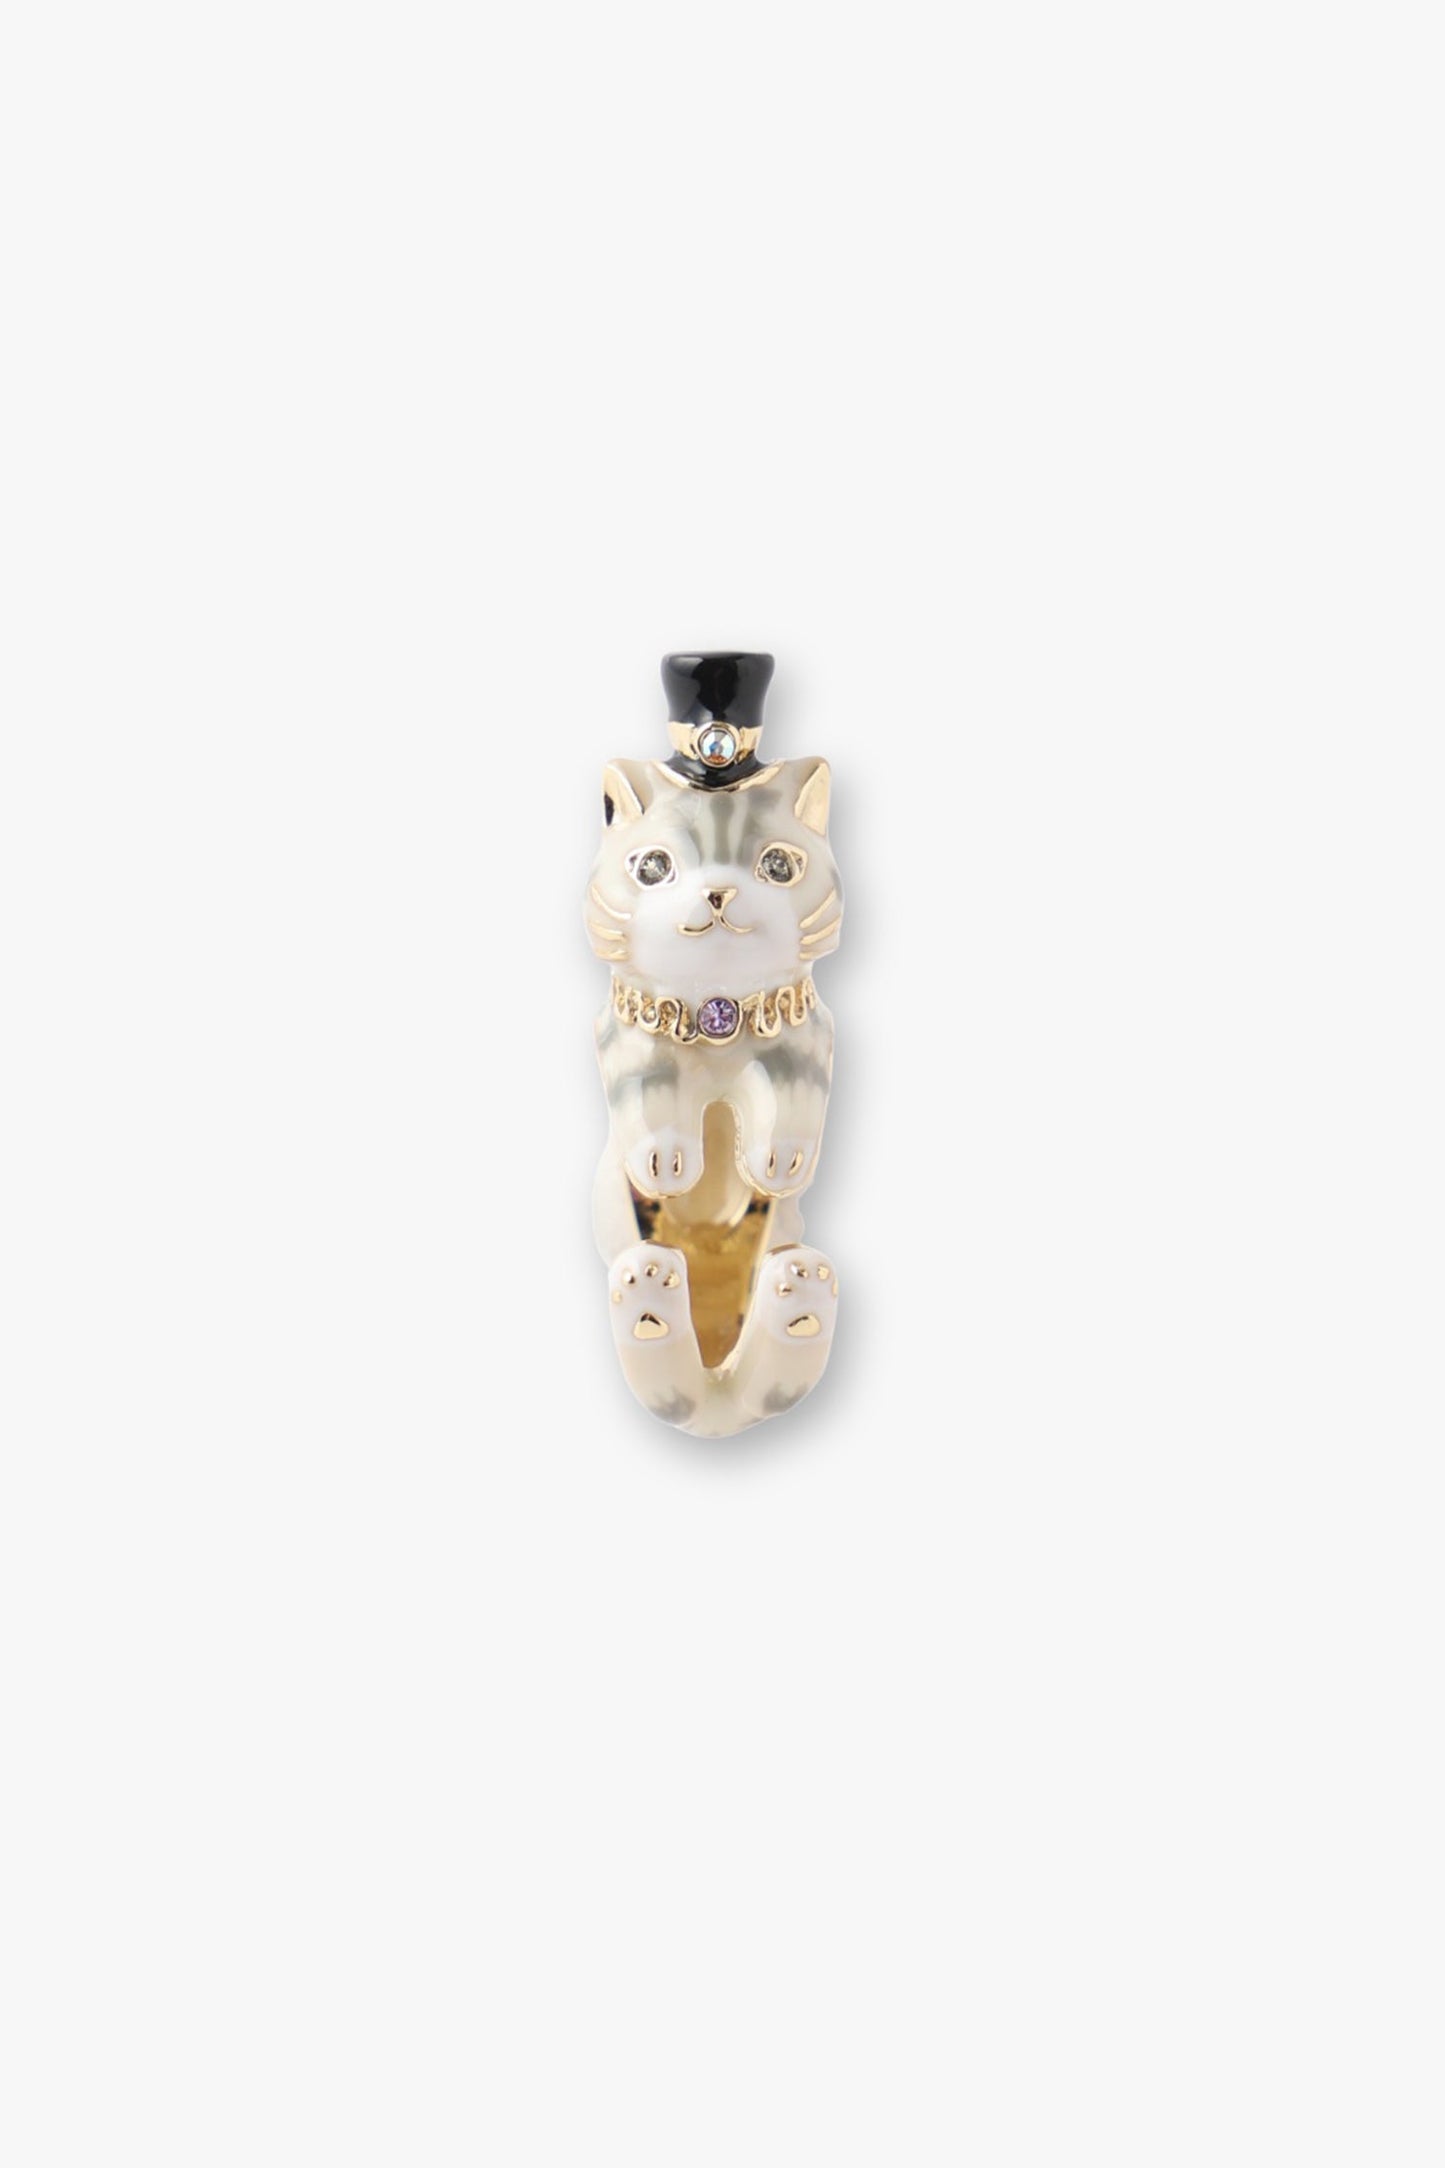 Hatted Cat Ring Gold, legs form the ring, with golden edges on ears, paws, eyes, collar blue eyes